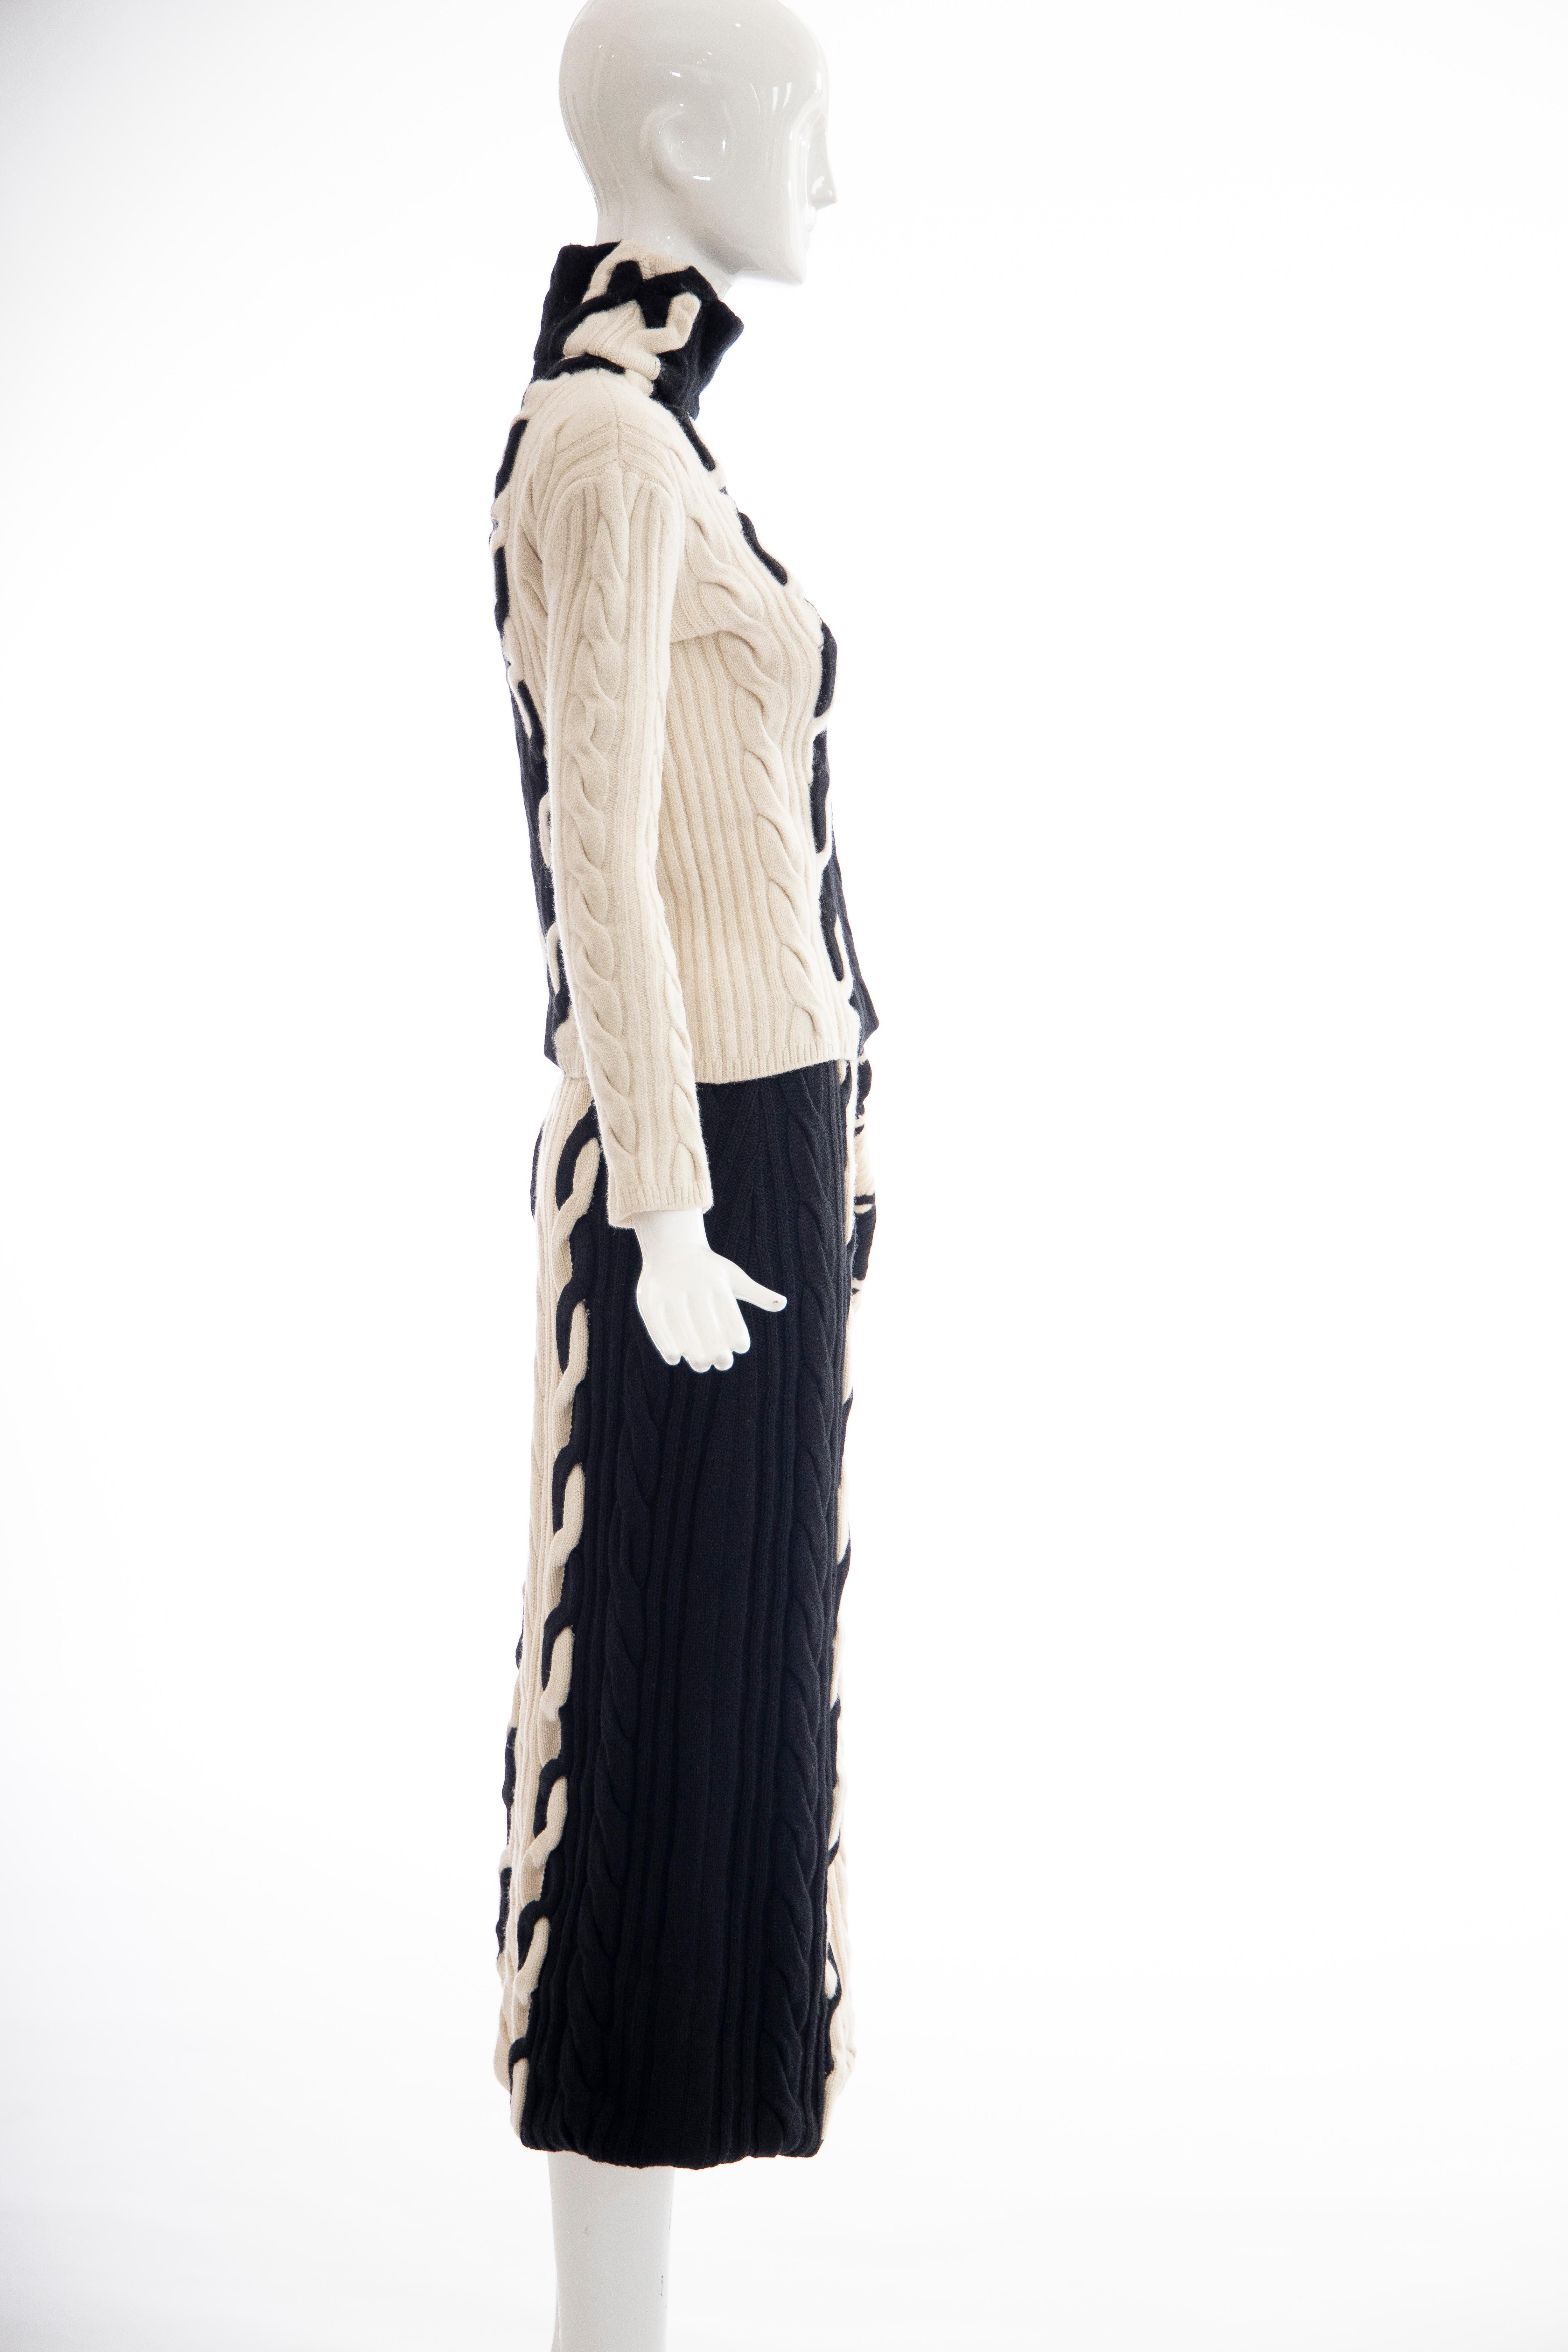 Women's Raf Simons for Christian Dior Wool Cashmere Cable Knit Skirt-Suit, Fall 2013